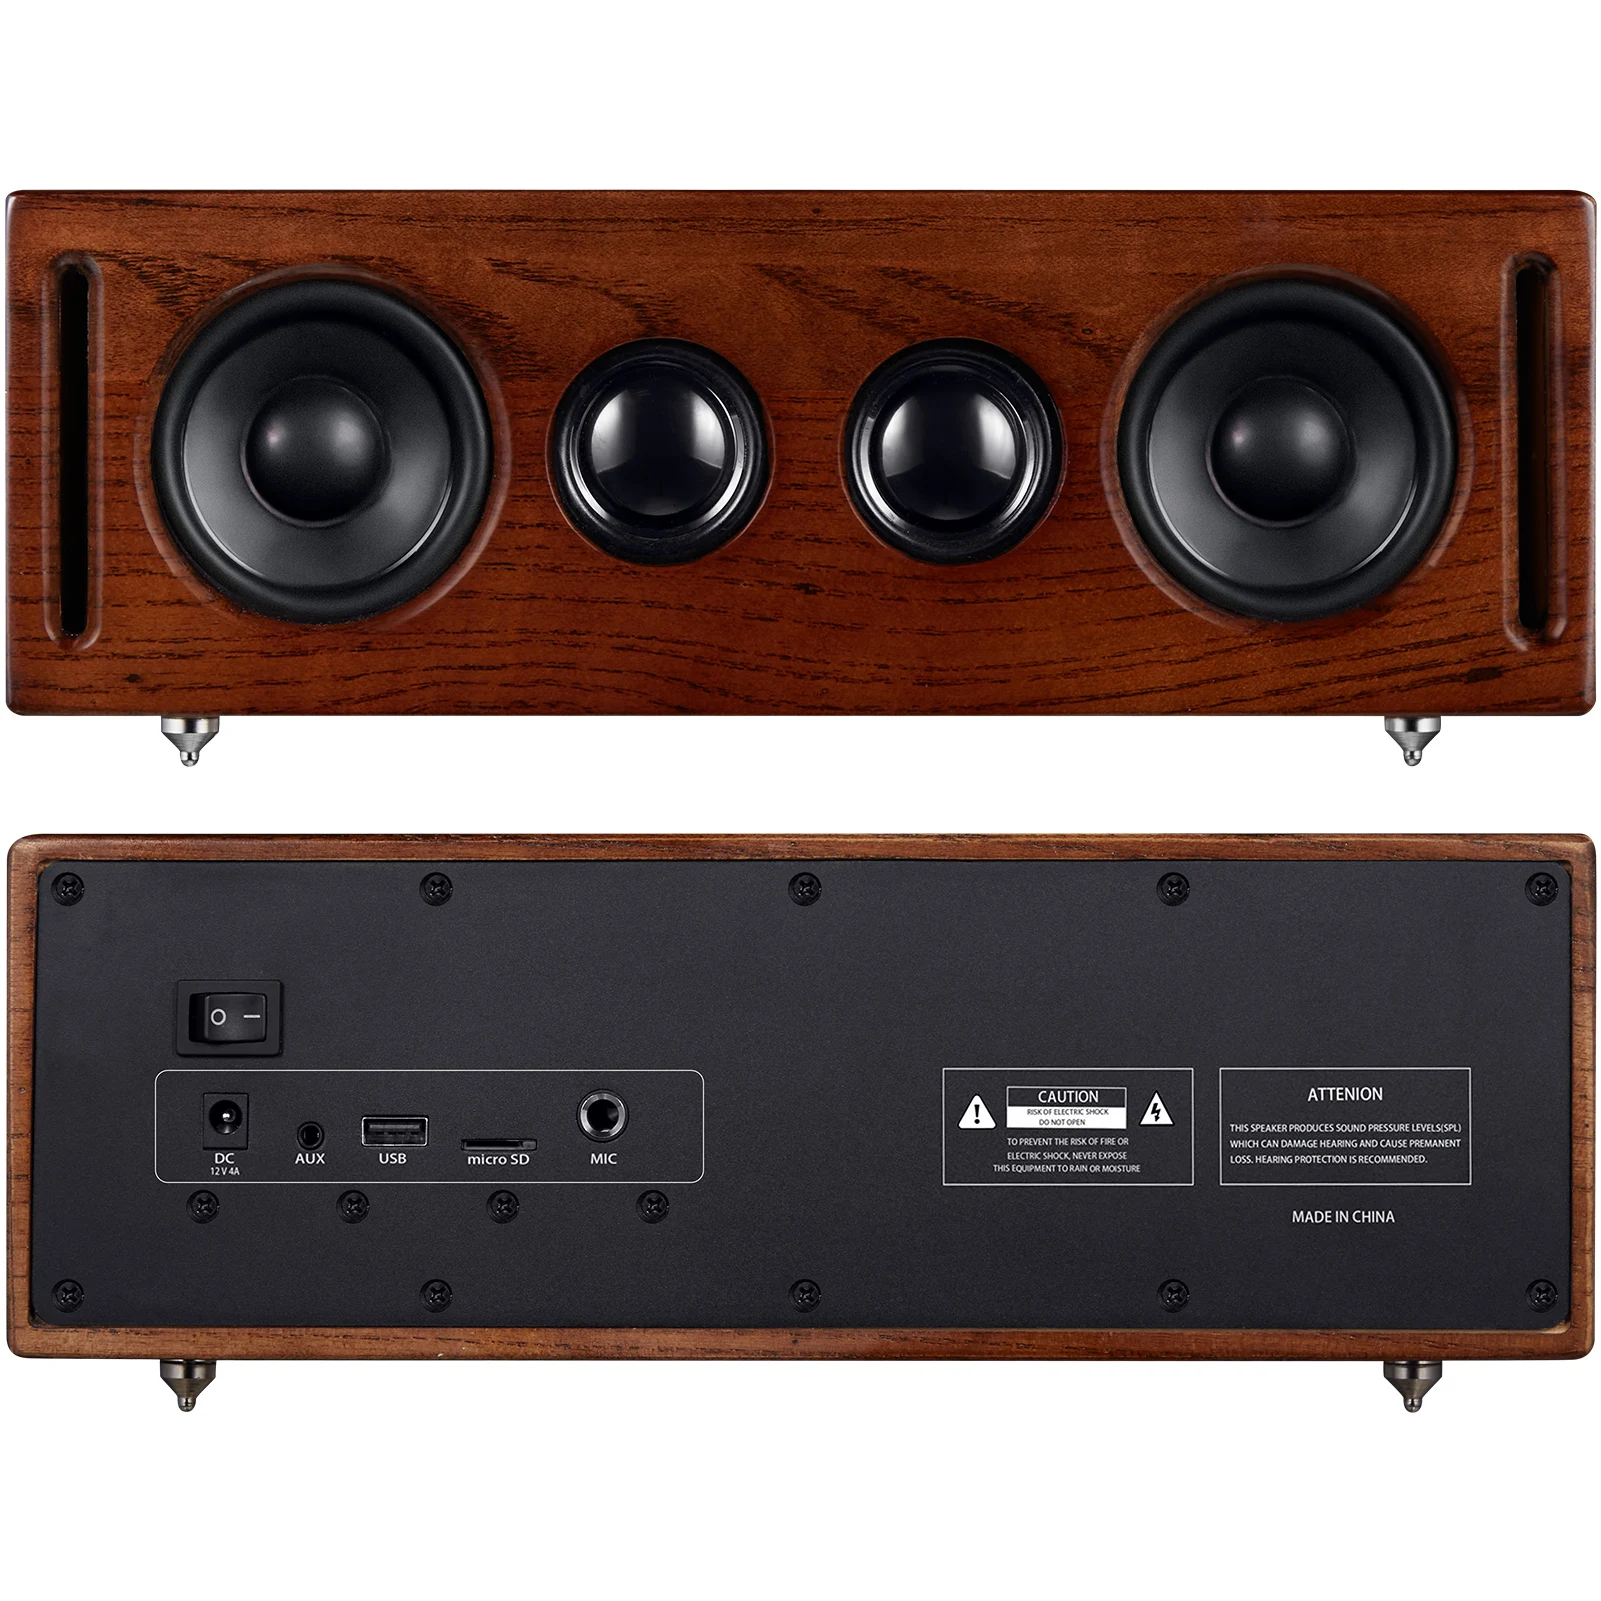 

Professional Subwoofer 40W Surround Sound Home Theater System Wooden Bluetooth Speaker